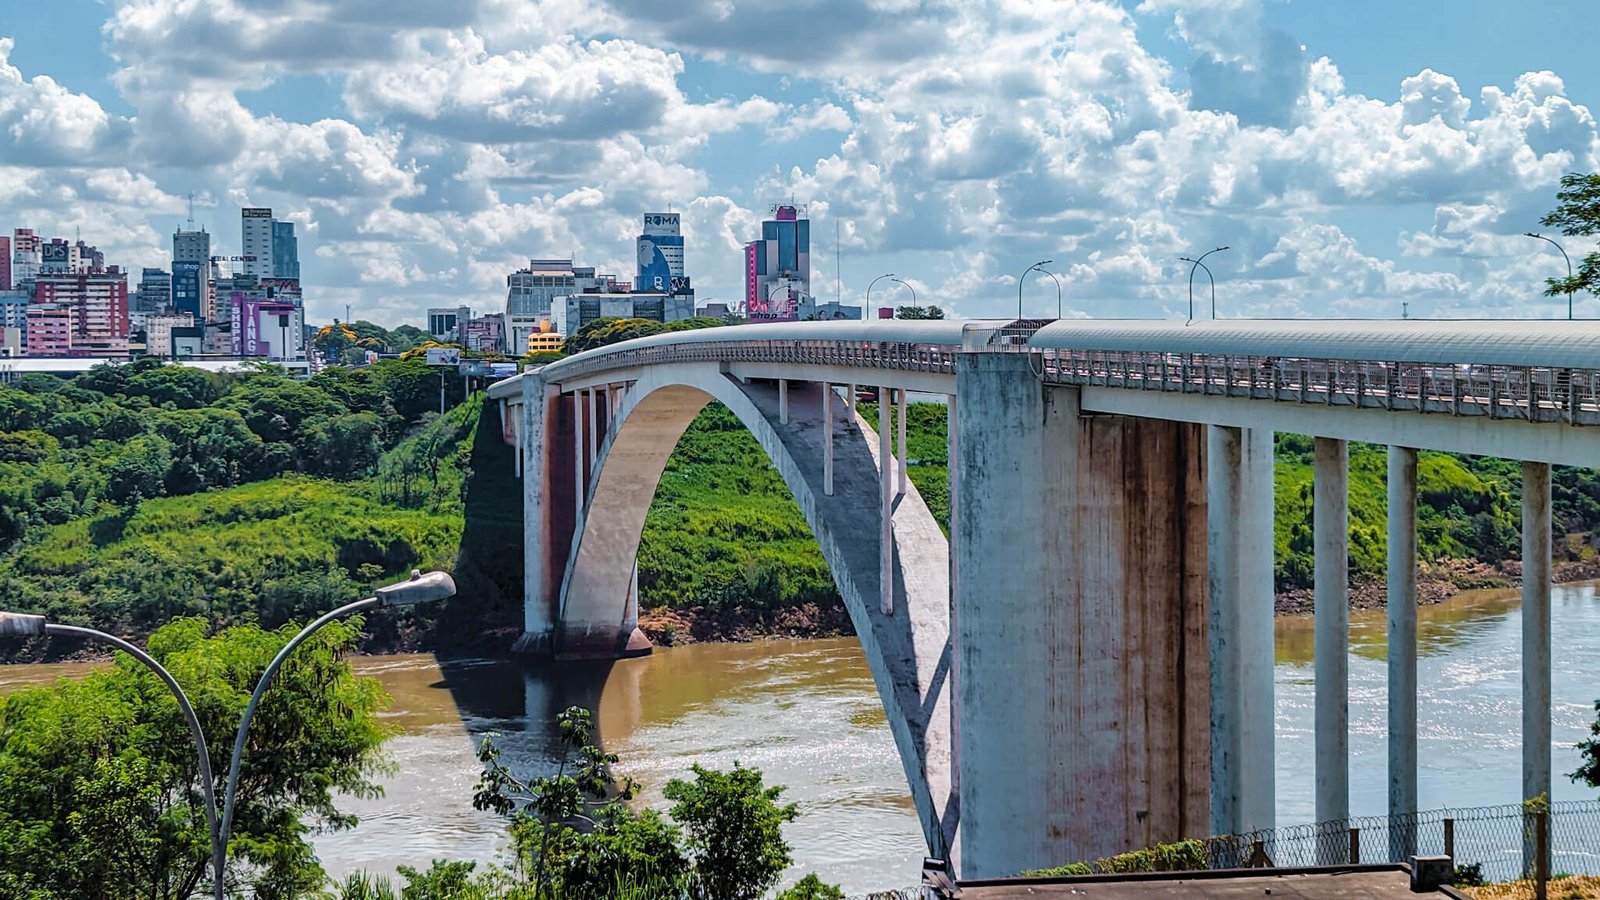 Crossing into Paraguay over the Friendship Bridge